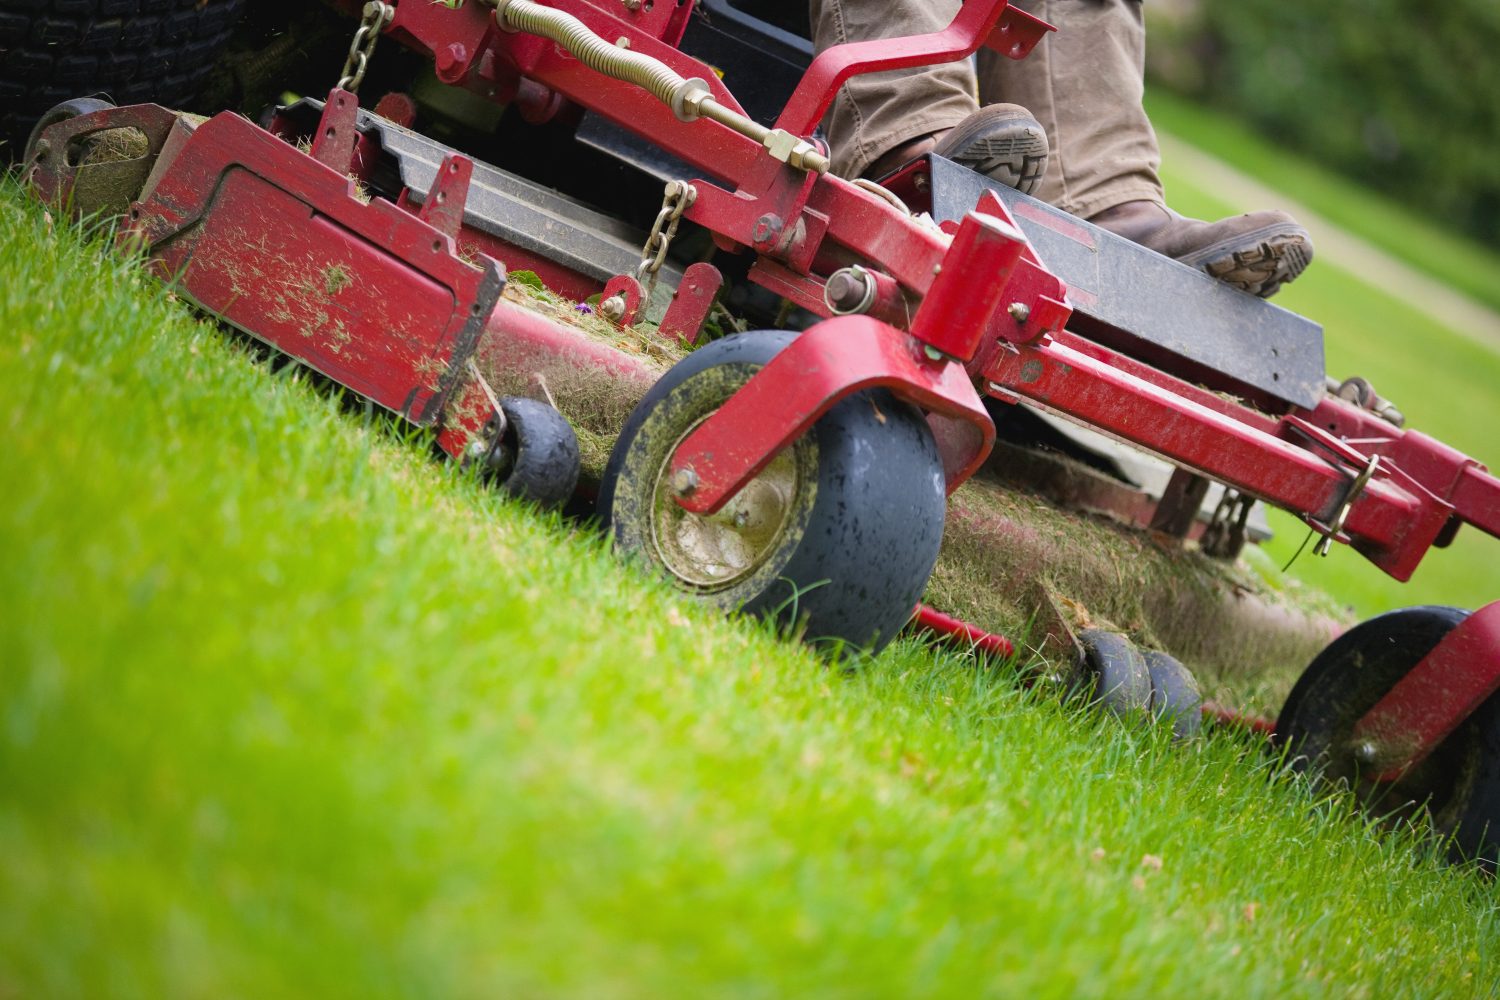 Shopping for yard equipment: Things to know